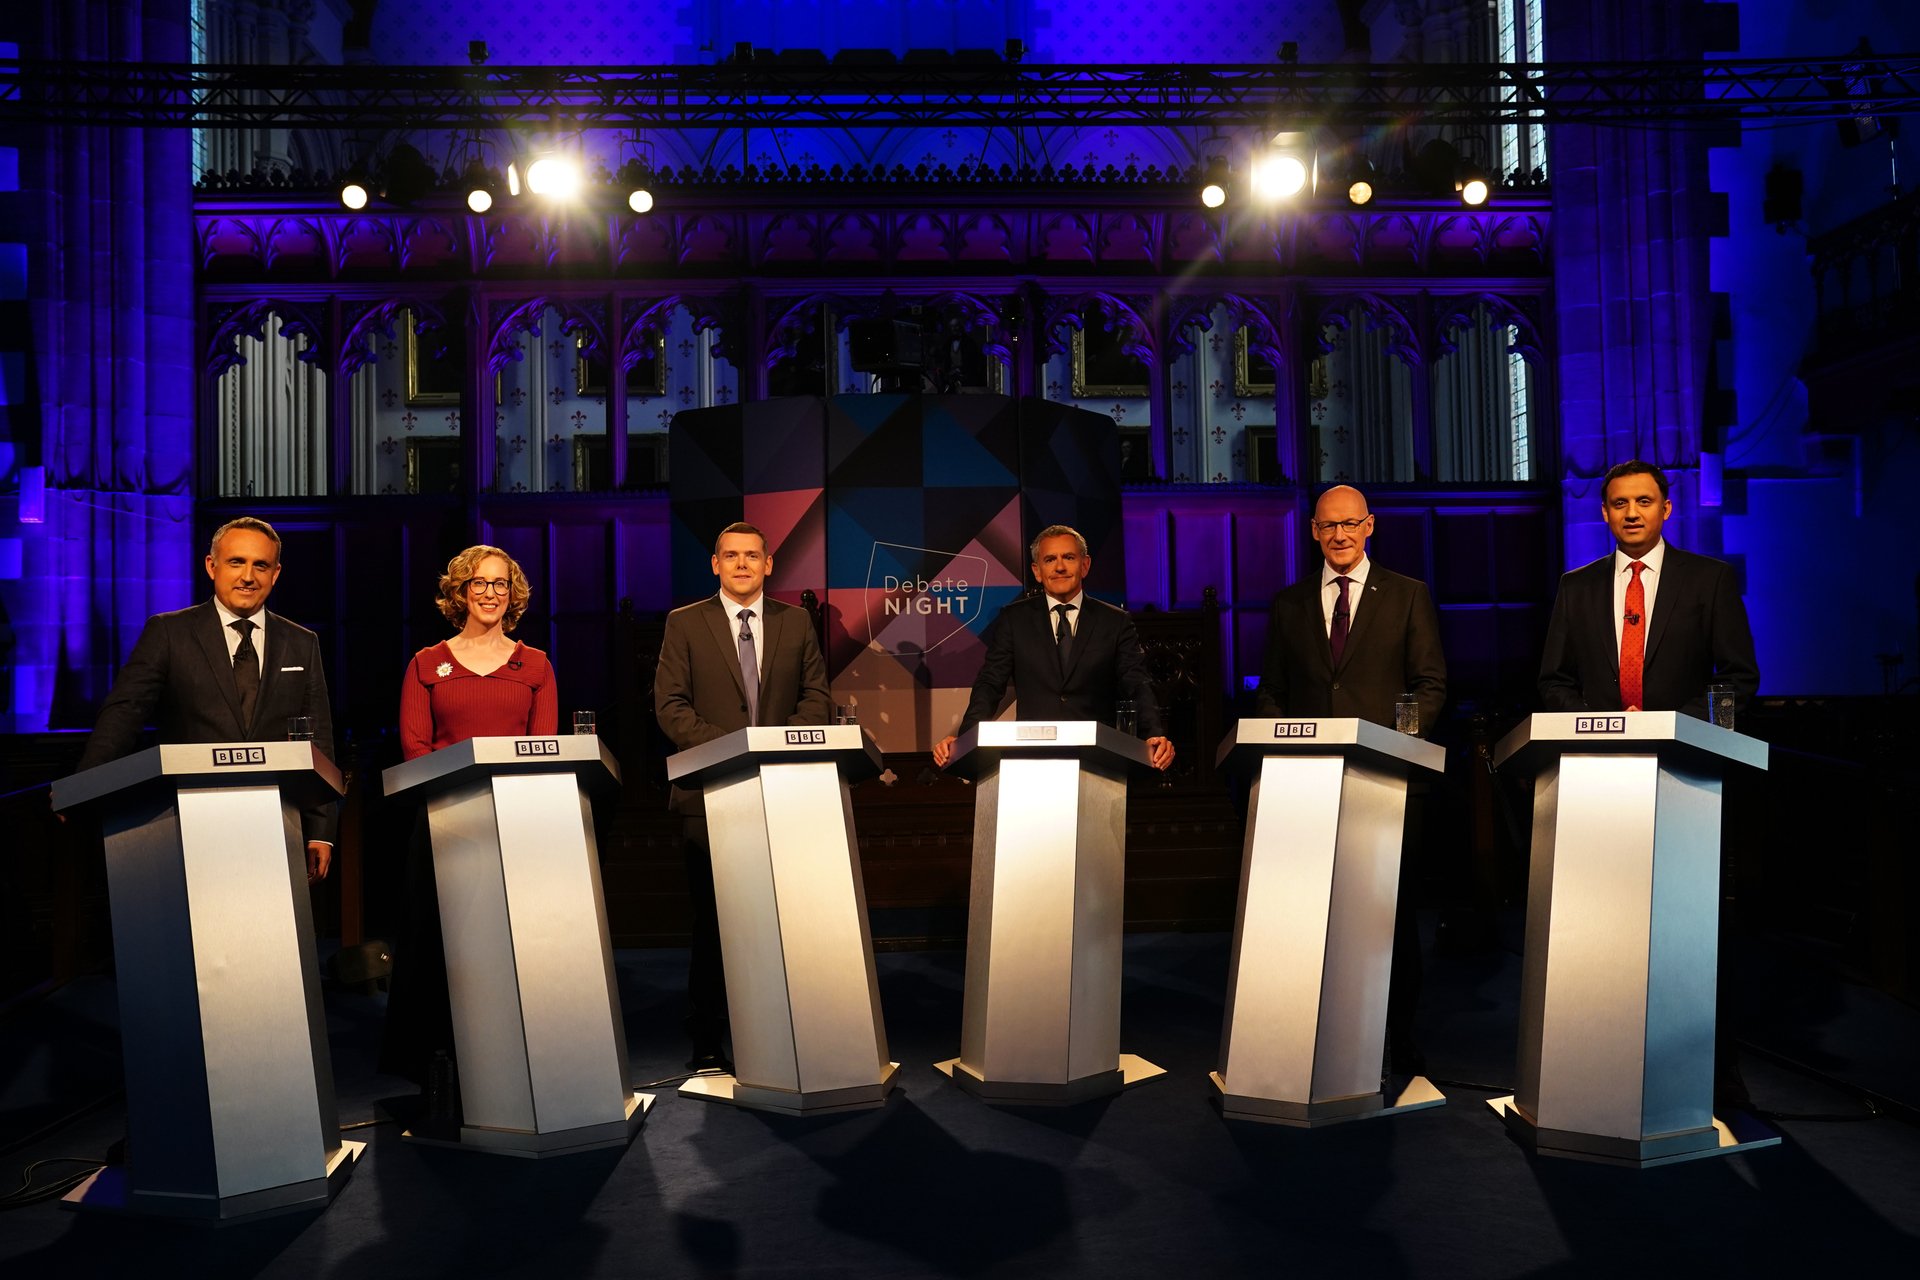 The leaders of the five main parties at Holyrood all took part in the debate.